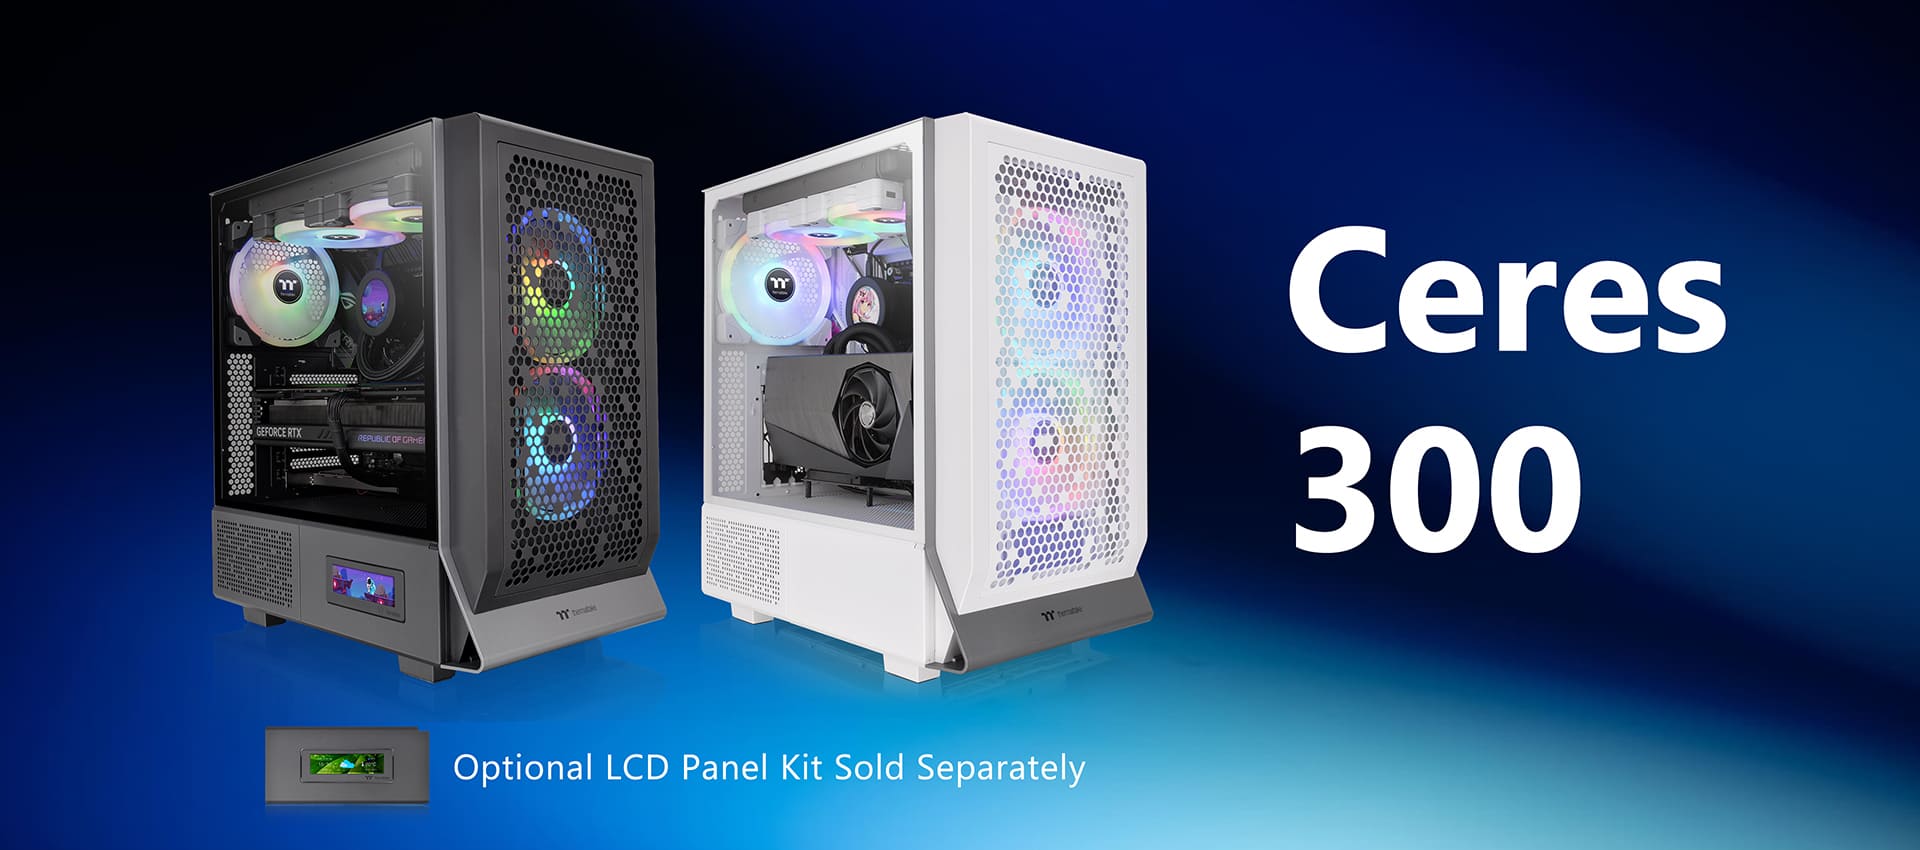 Thermaltake Ceres 300 Mid-Tower Case